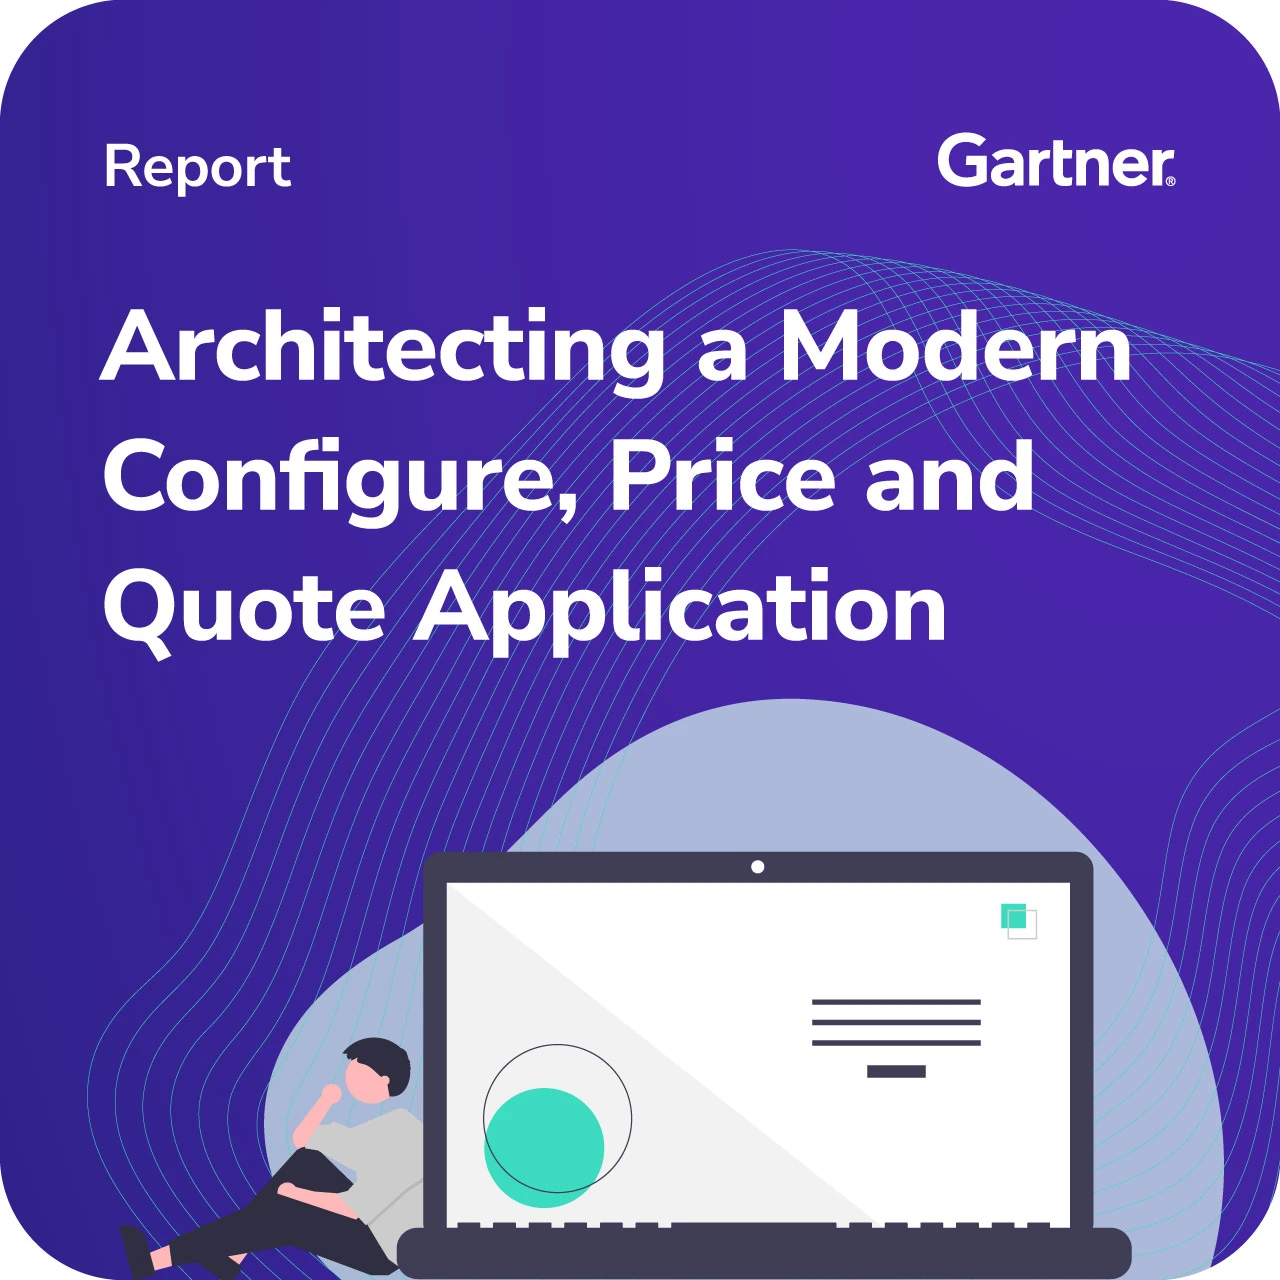 Architecting-a-Modern-Configure-Price-and-Quote-Application-square-2